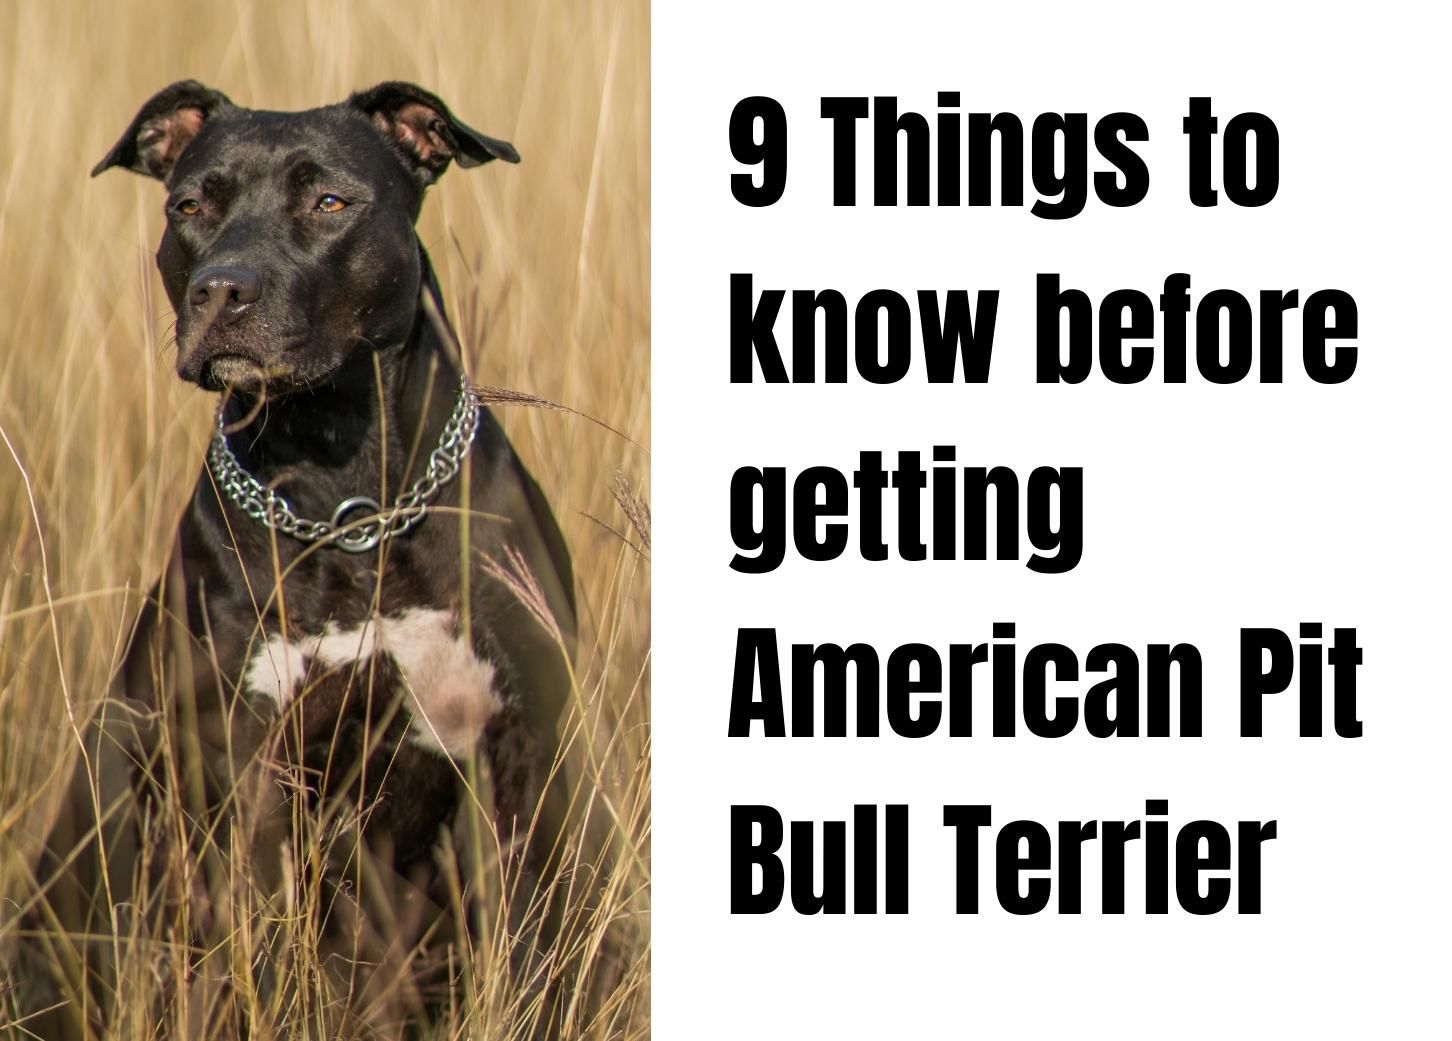 What You Should Know Before Getting an American Pit Bull Terrier